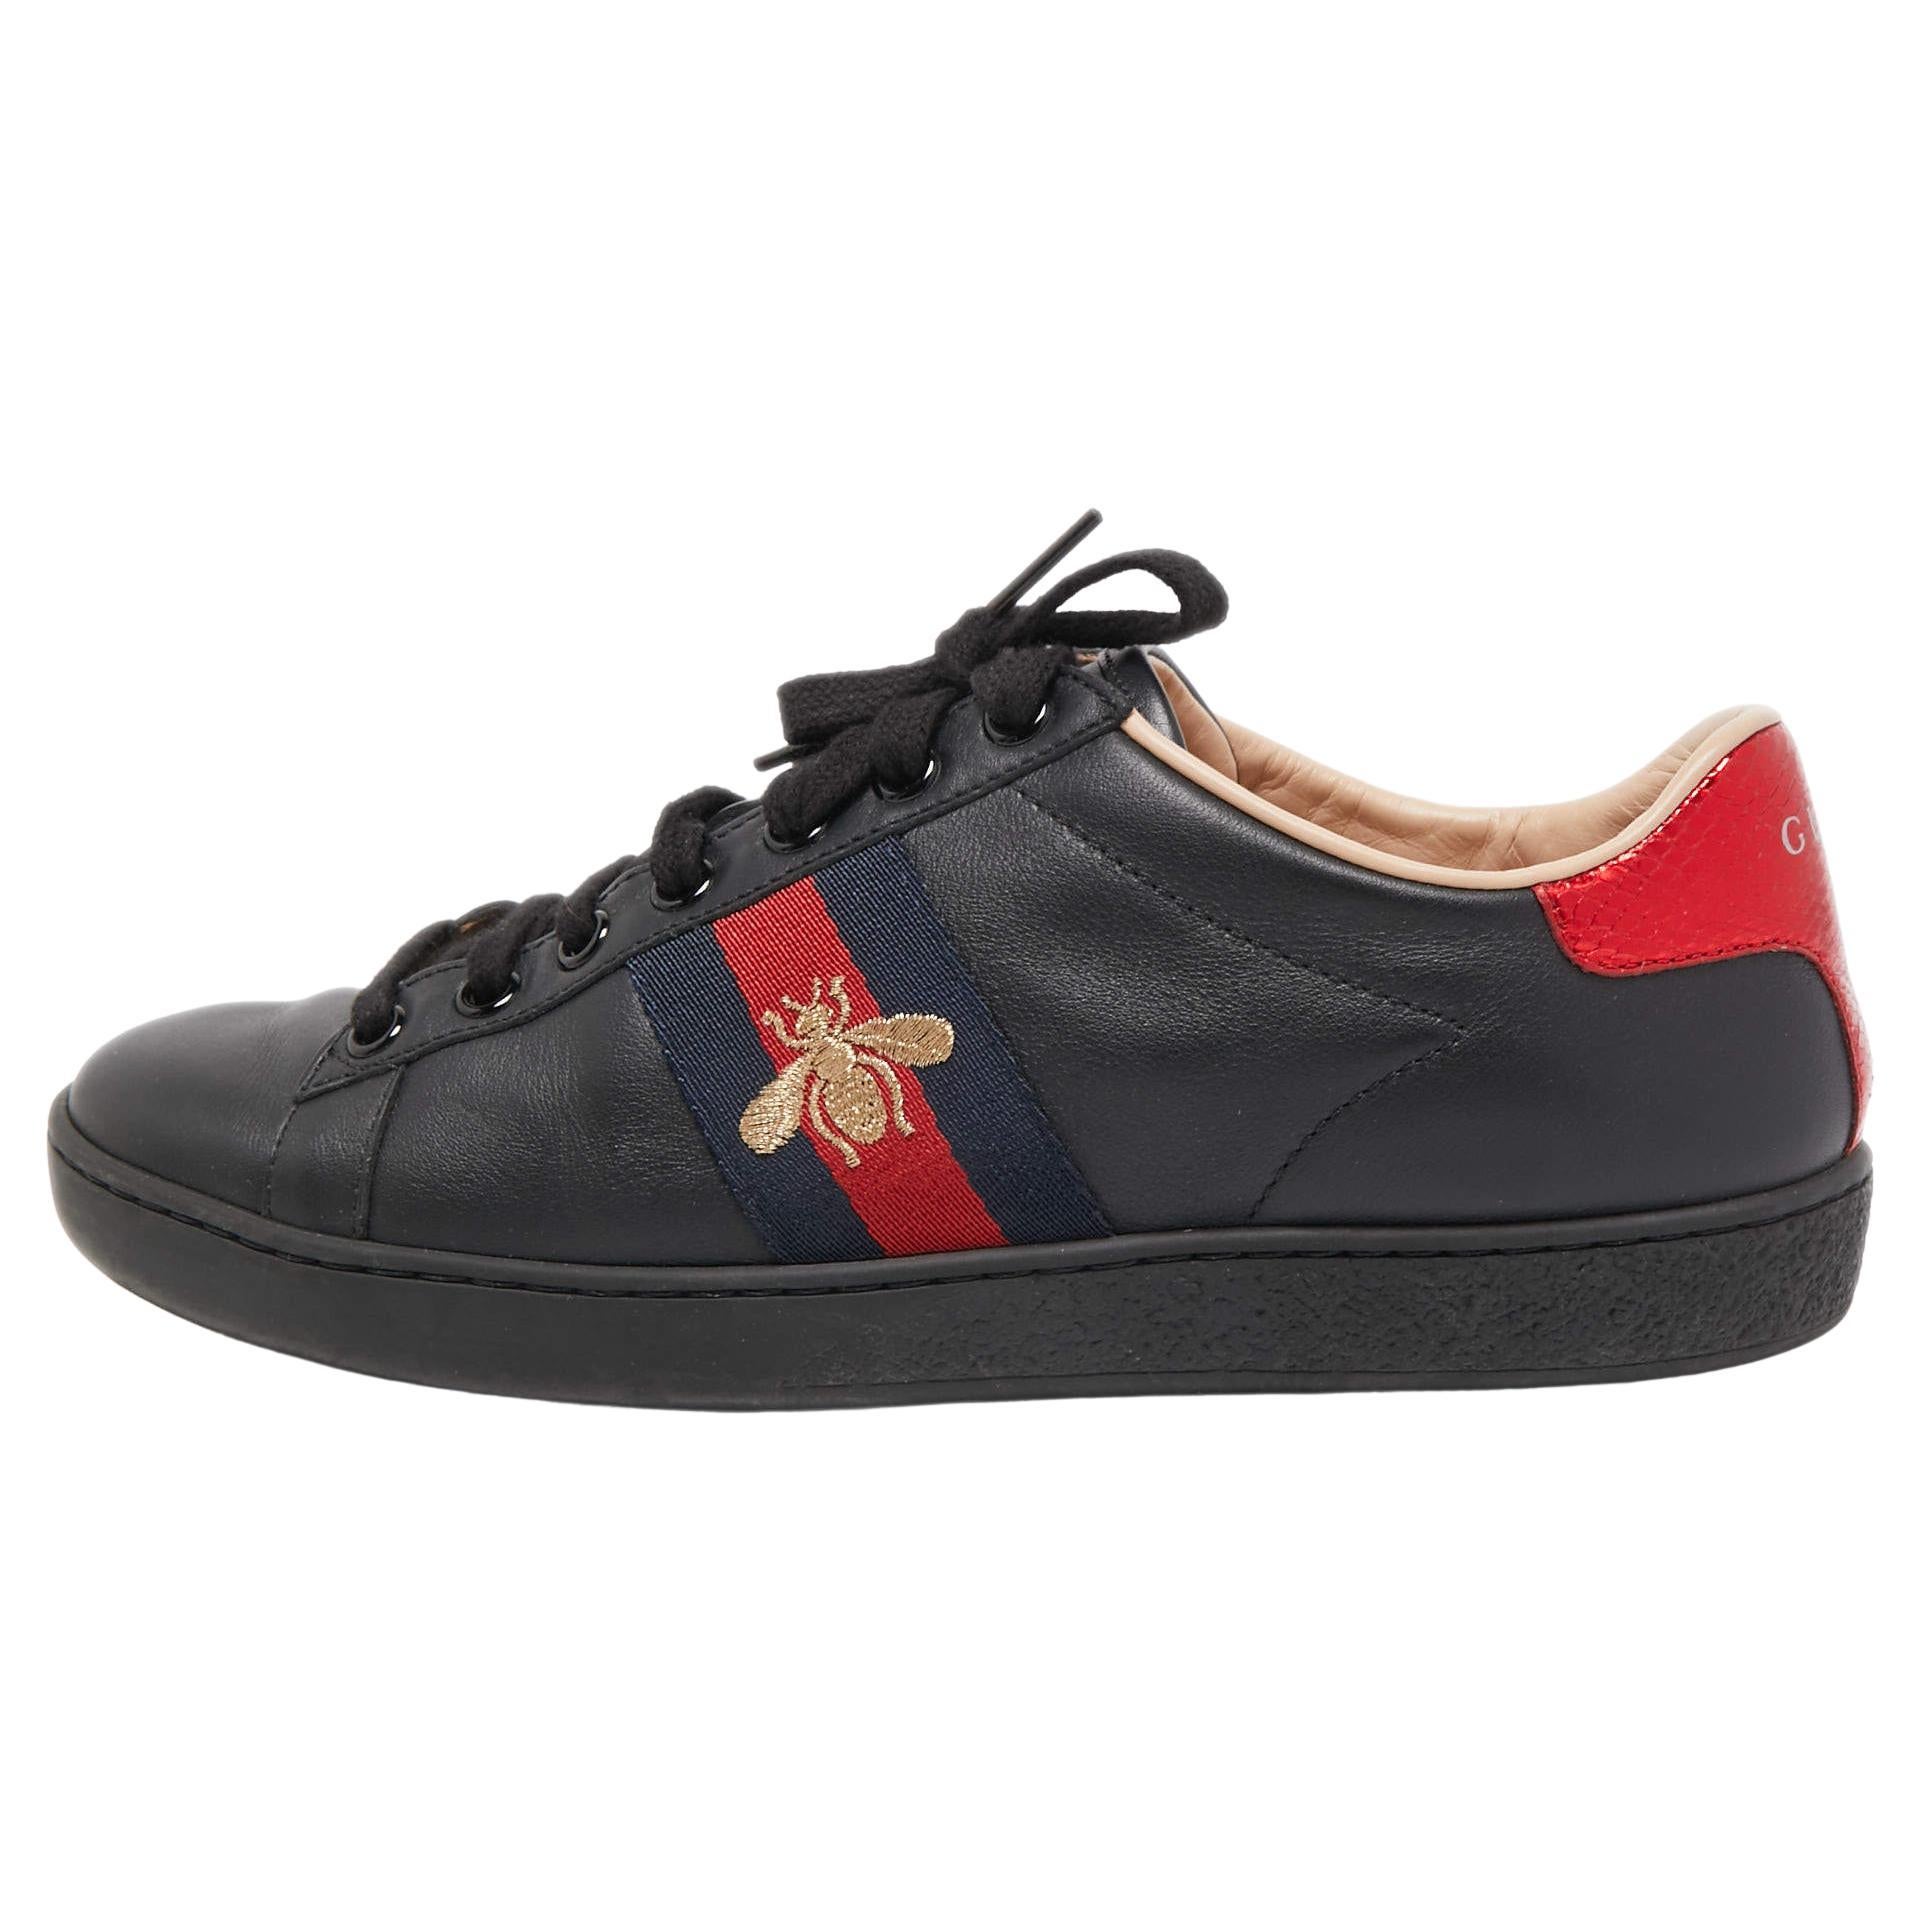 Gucci Black Leather Ace Web Low Top Sneakers Size 36